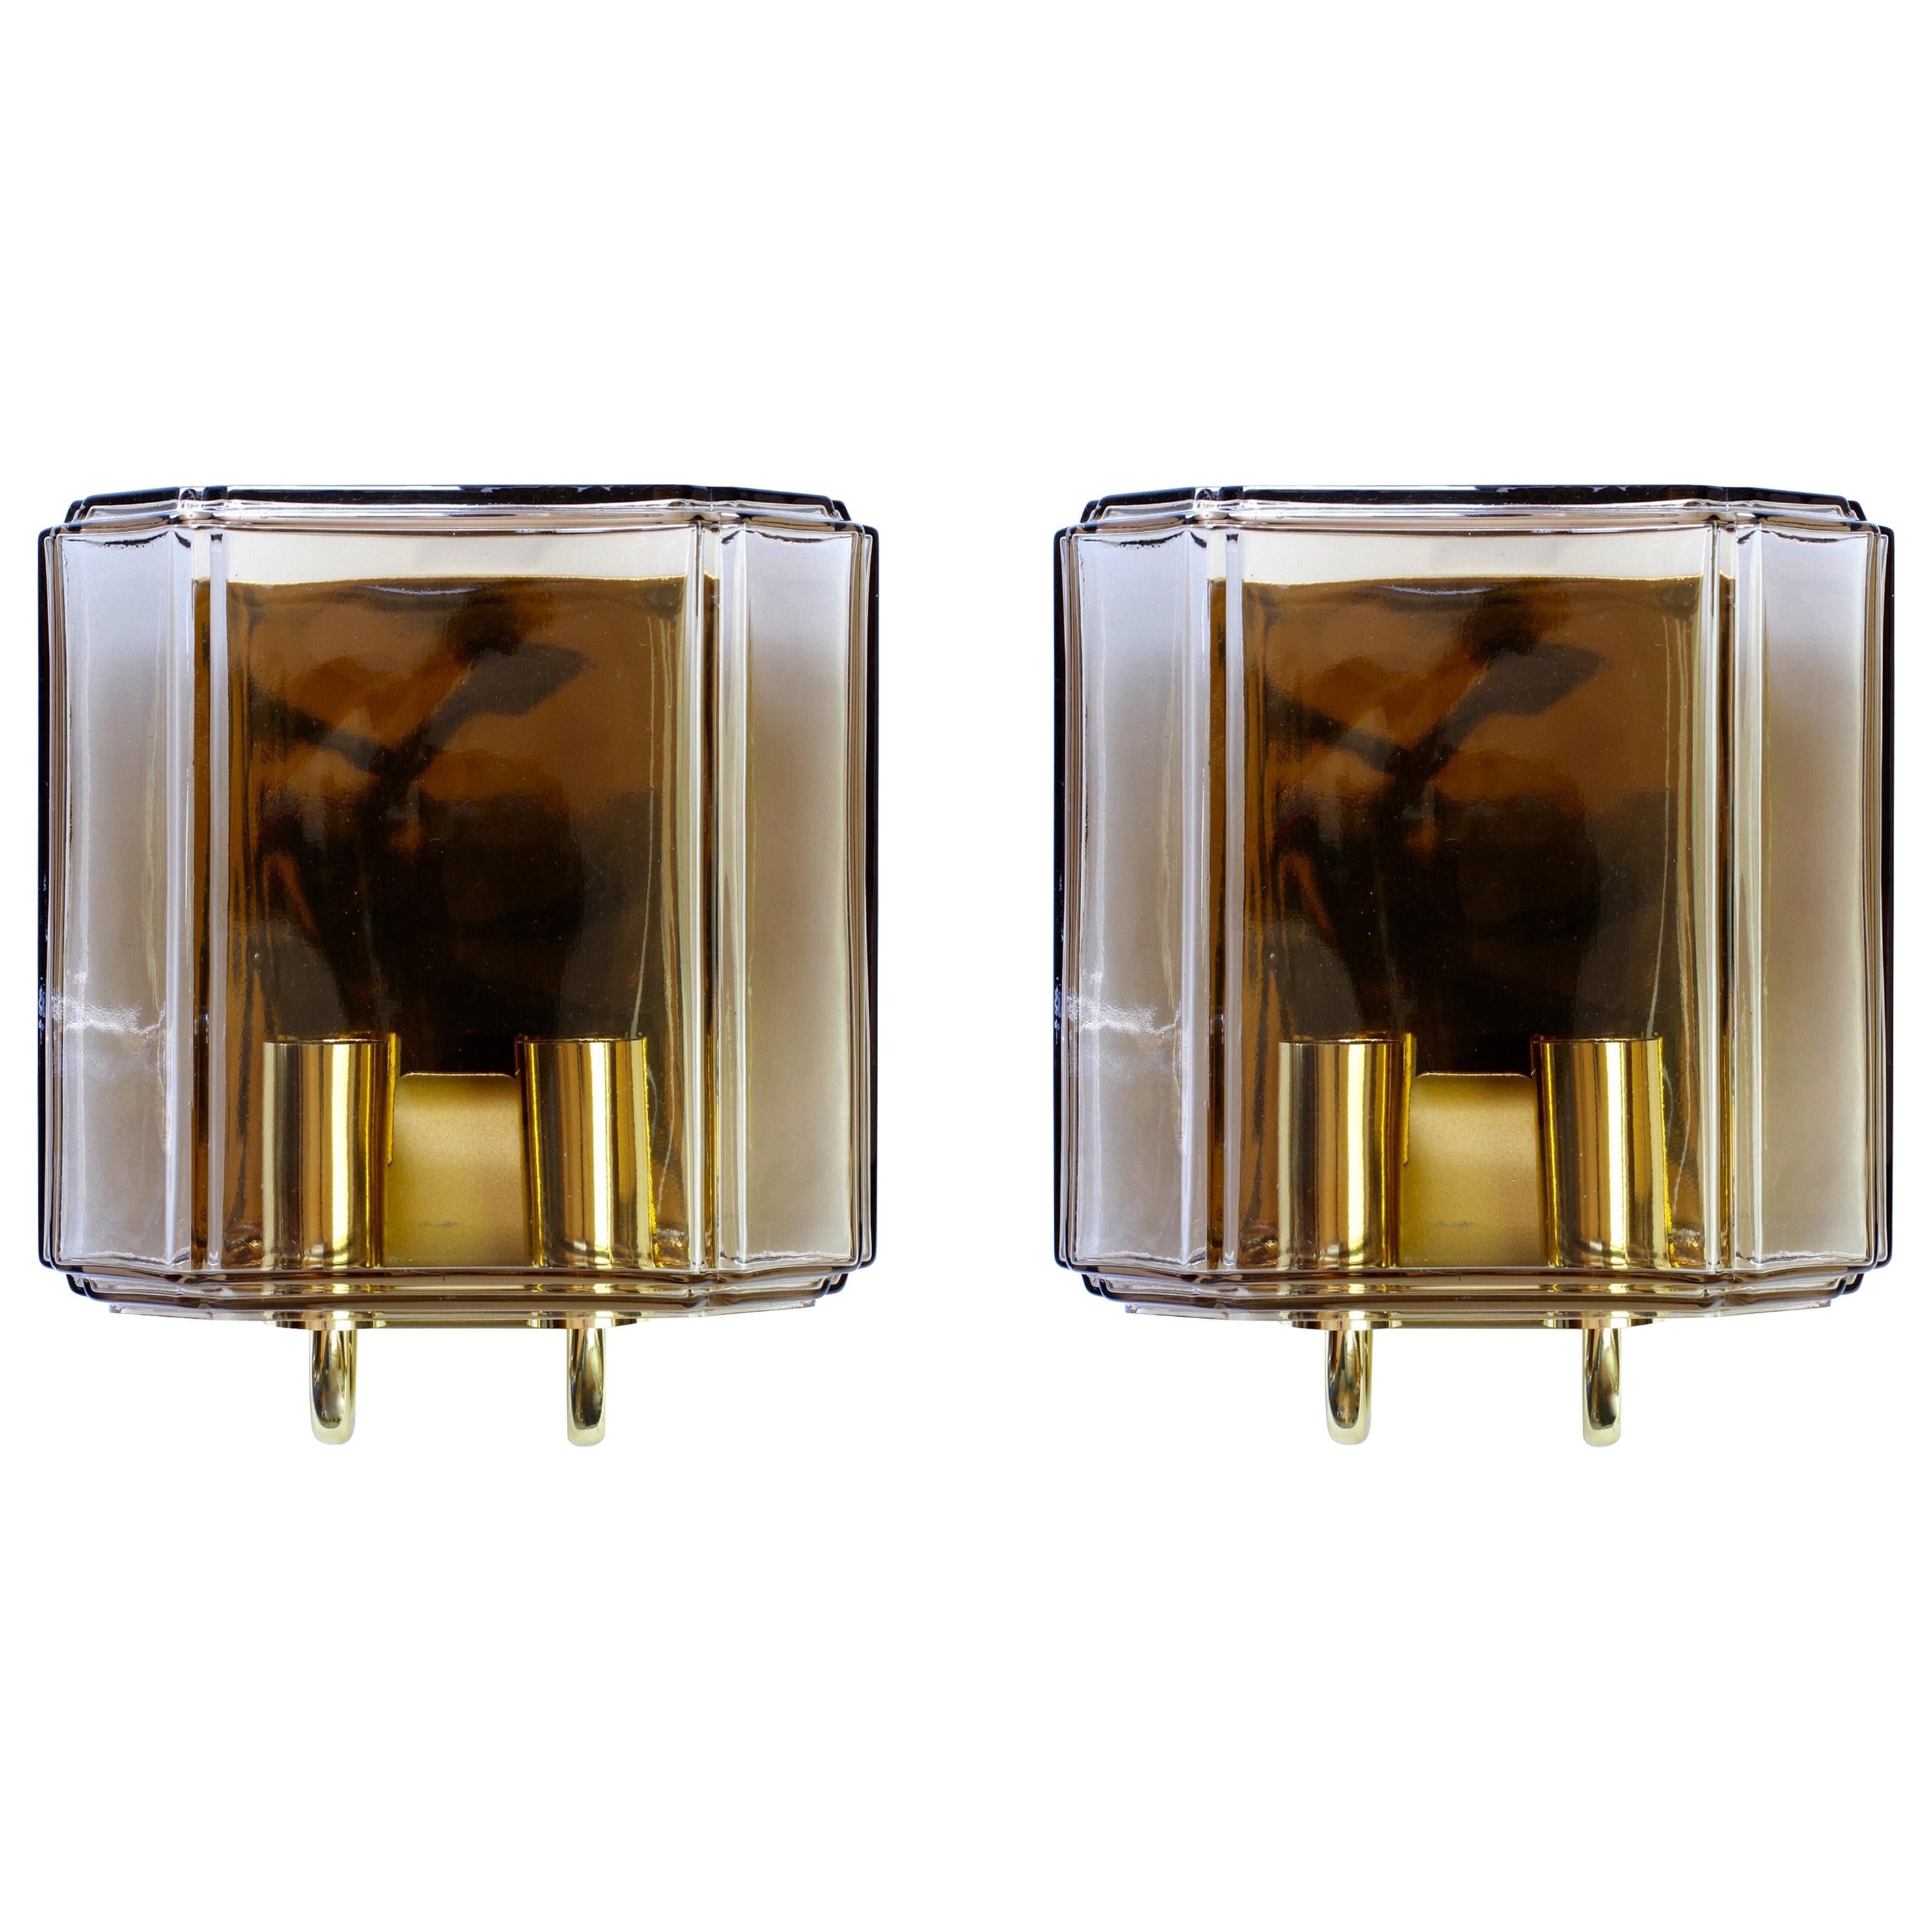 Vintage 1970s Pair of Toned Glass Wall Mounted Sconces by Limburg, Germany